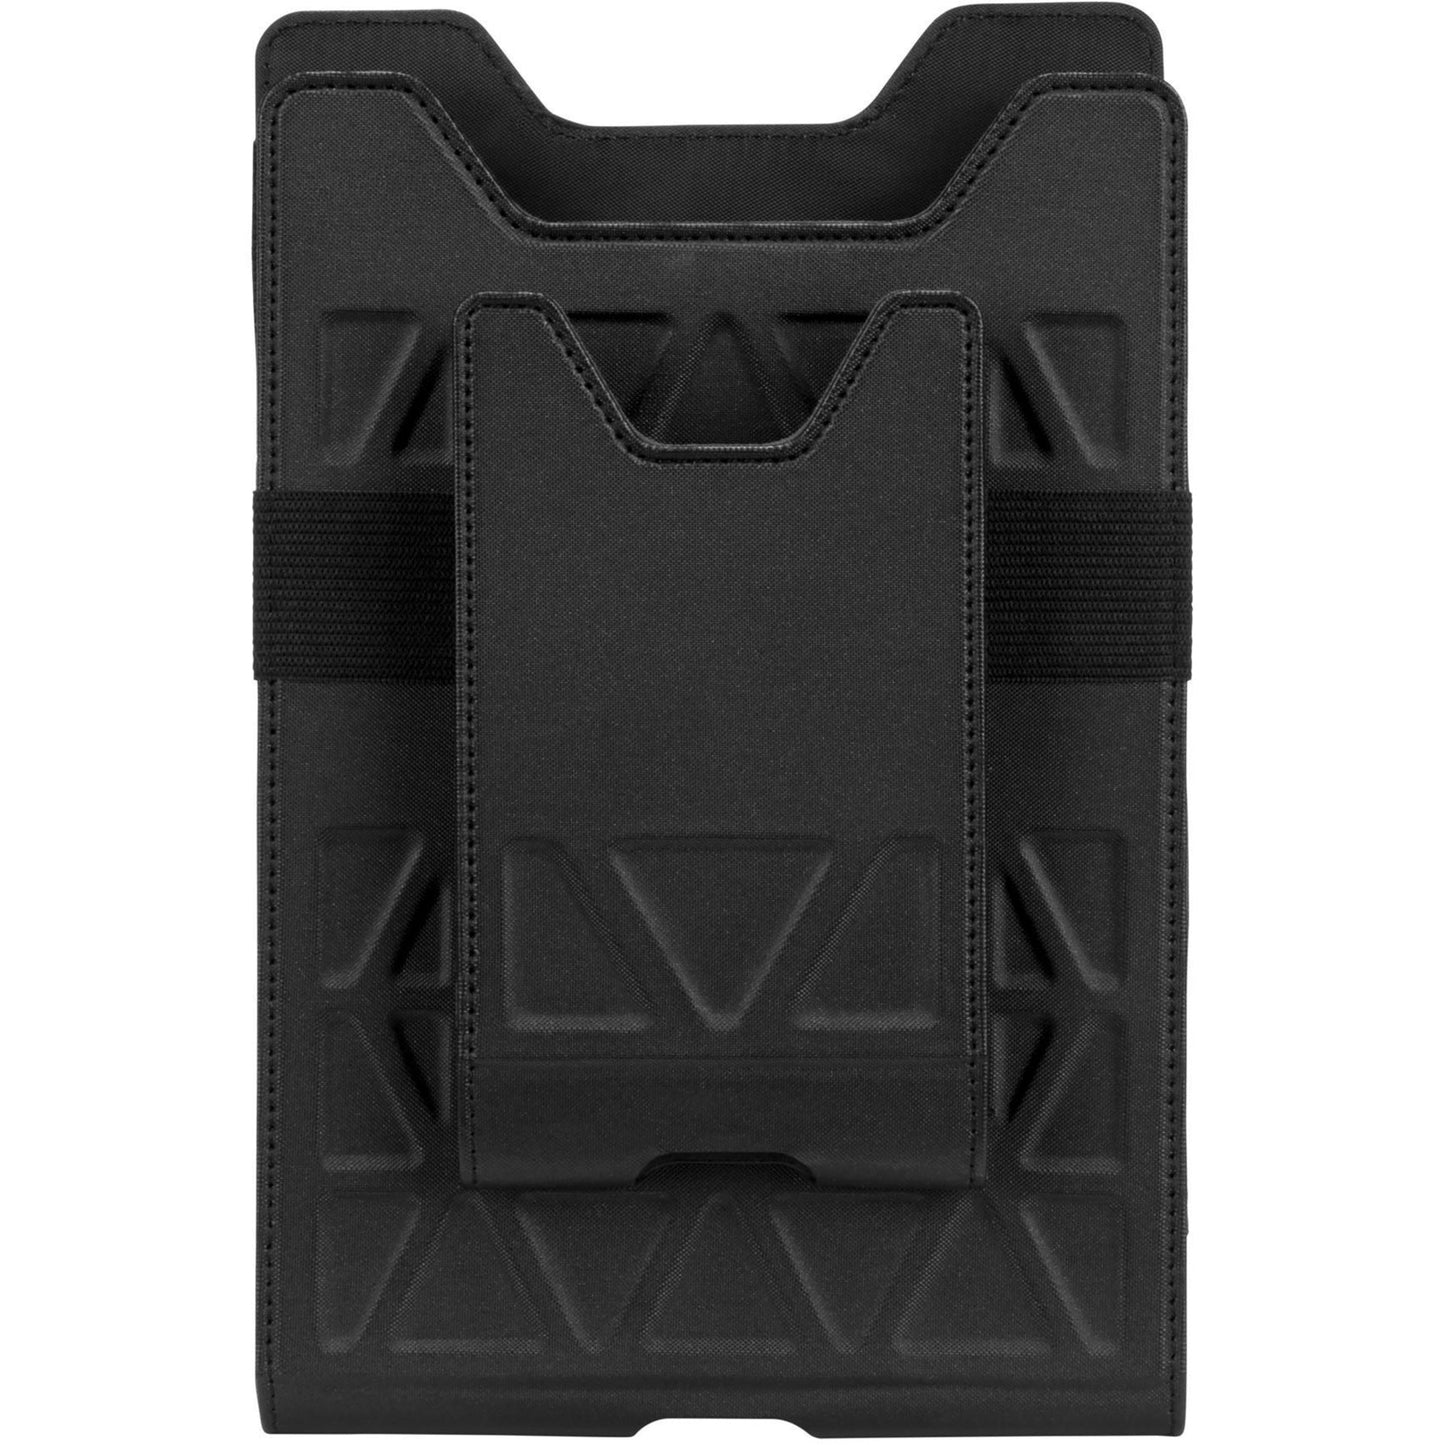 Targus Field-Ready THZ711GLZ Carrying Case (Holster) for 7" to 8" Tablet - Black